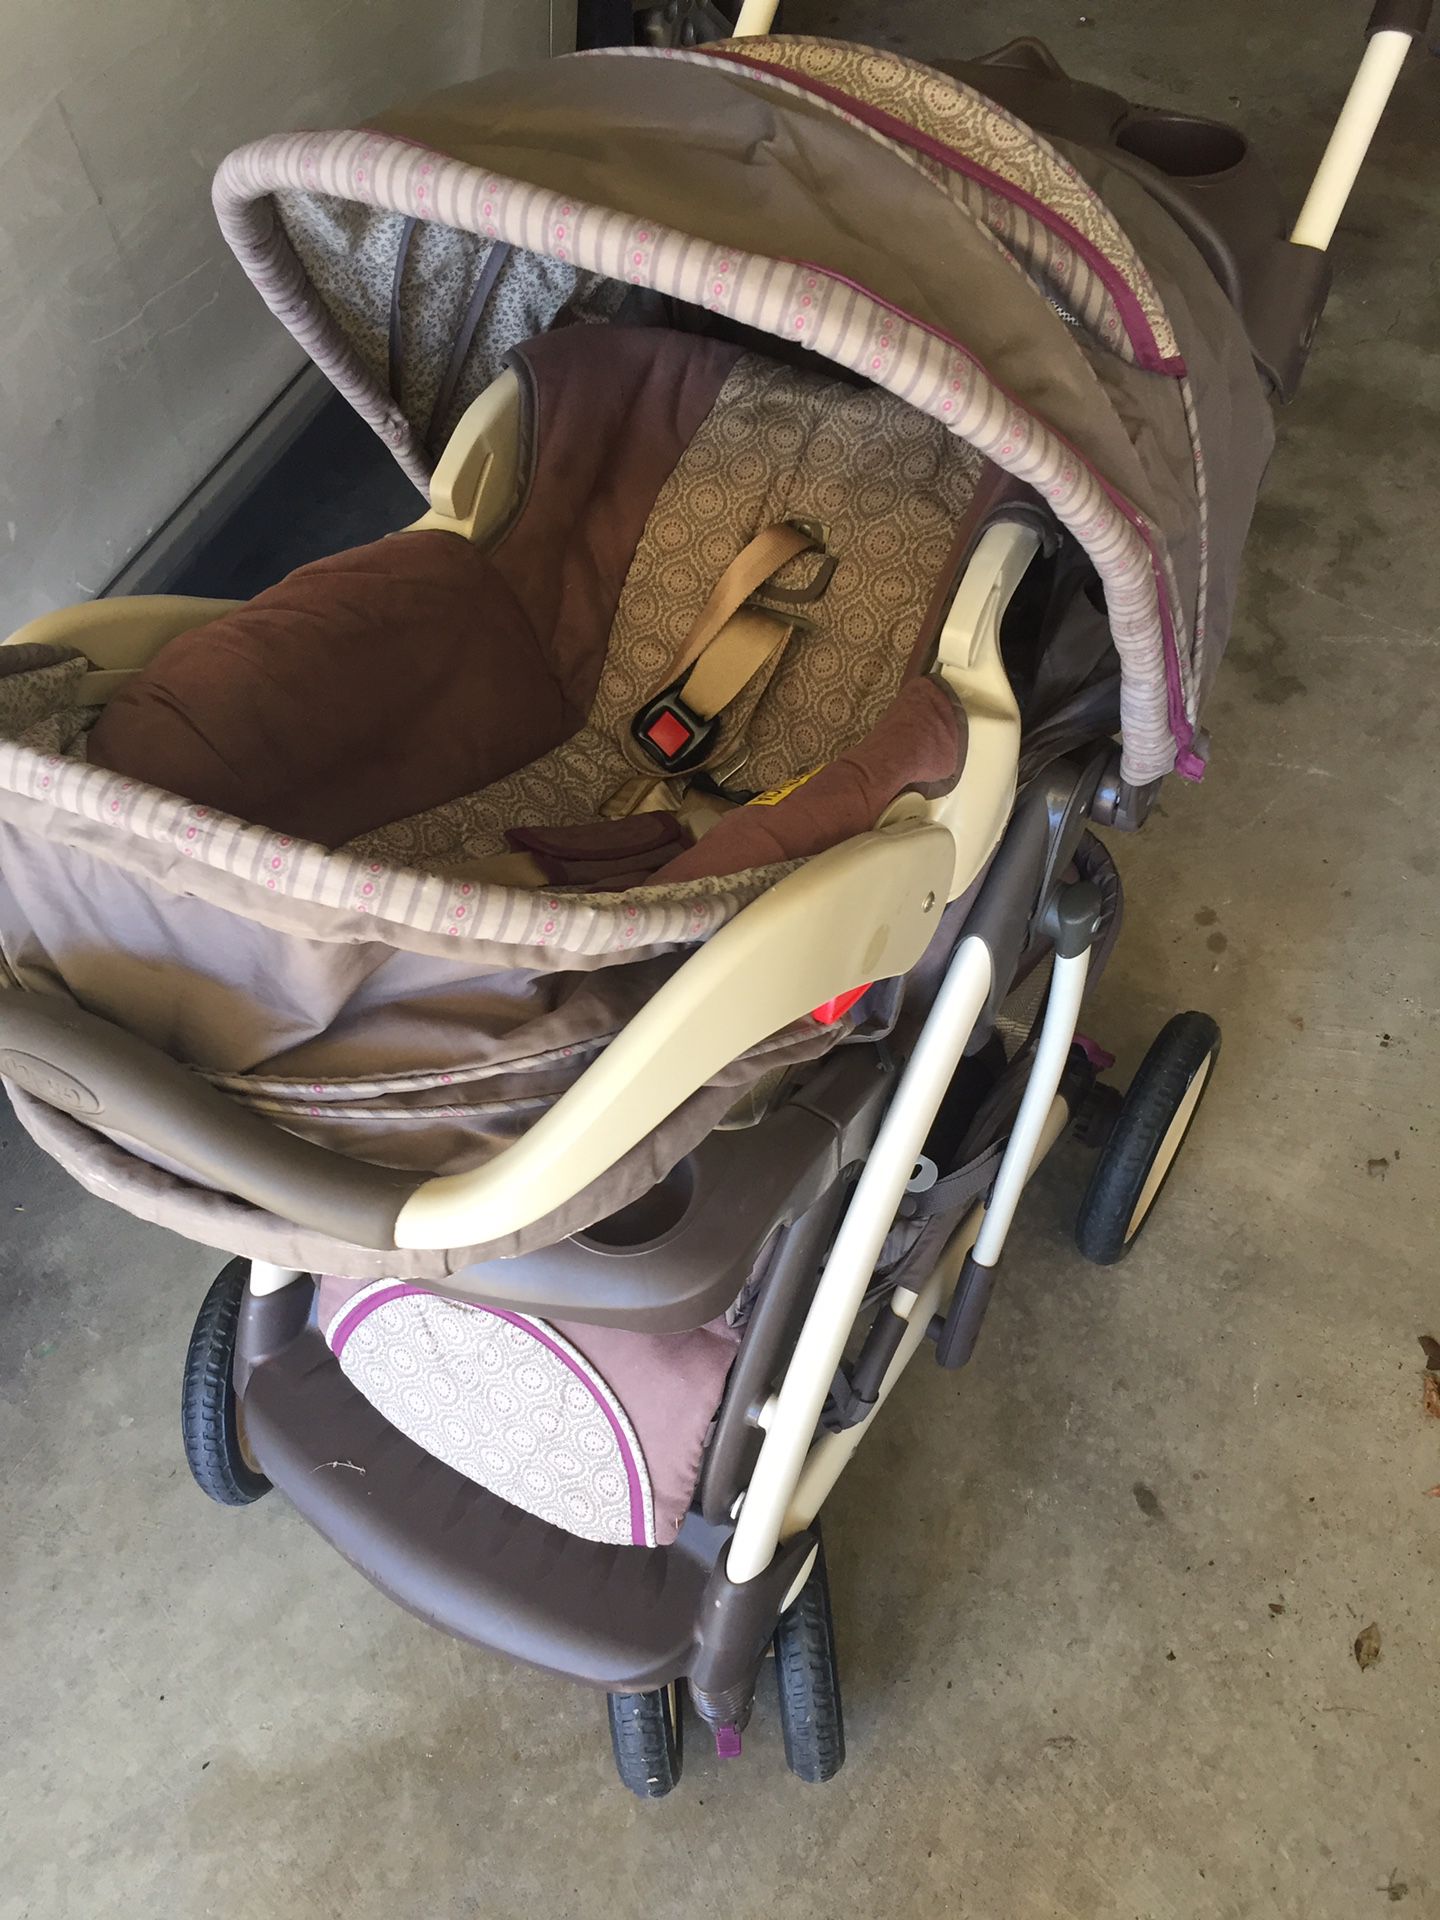 Free Baby stroller and car seat( GRACO)